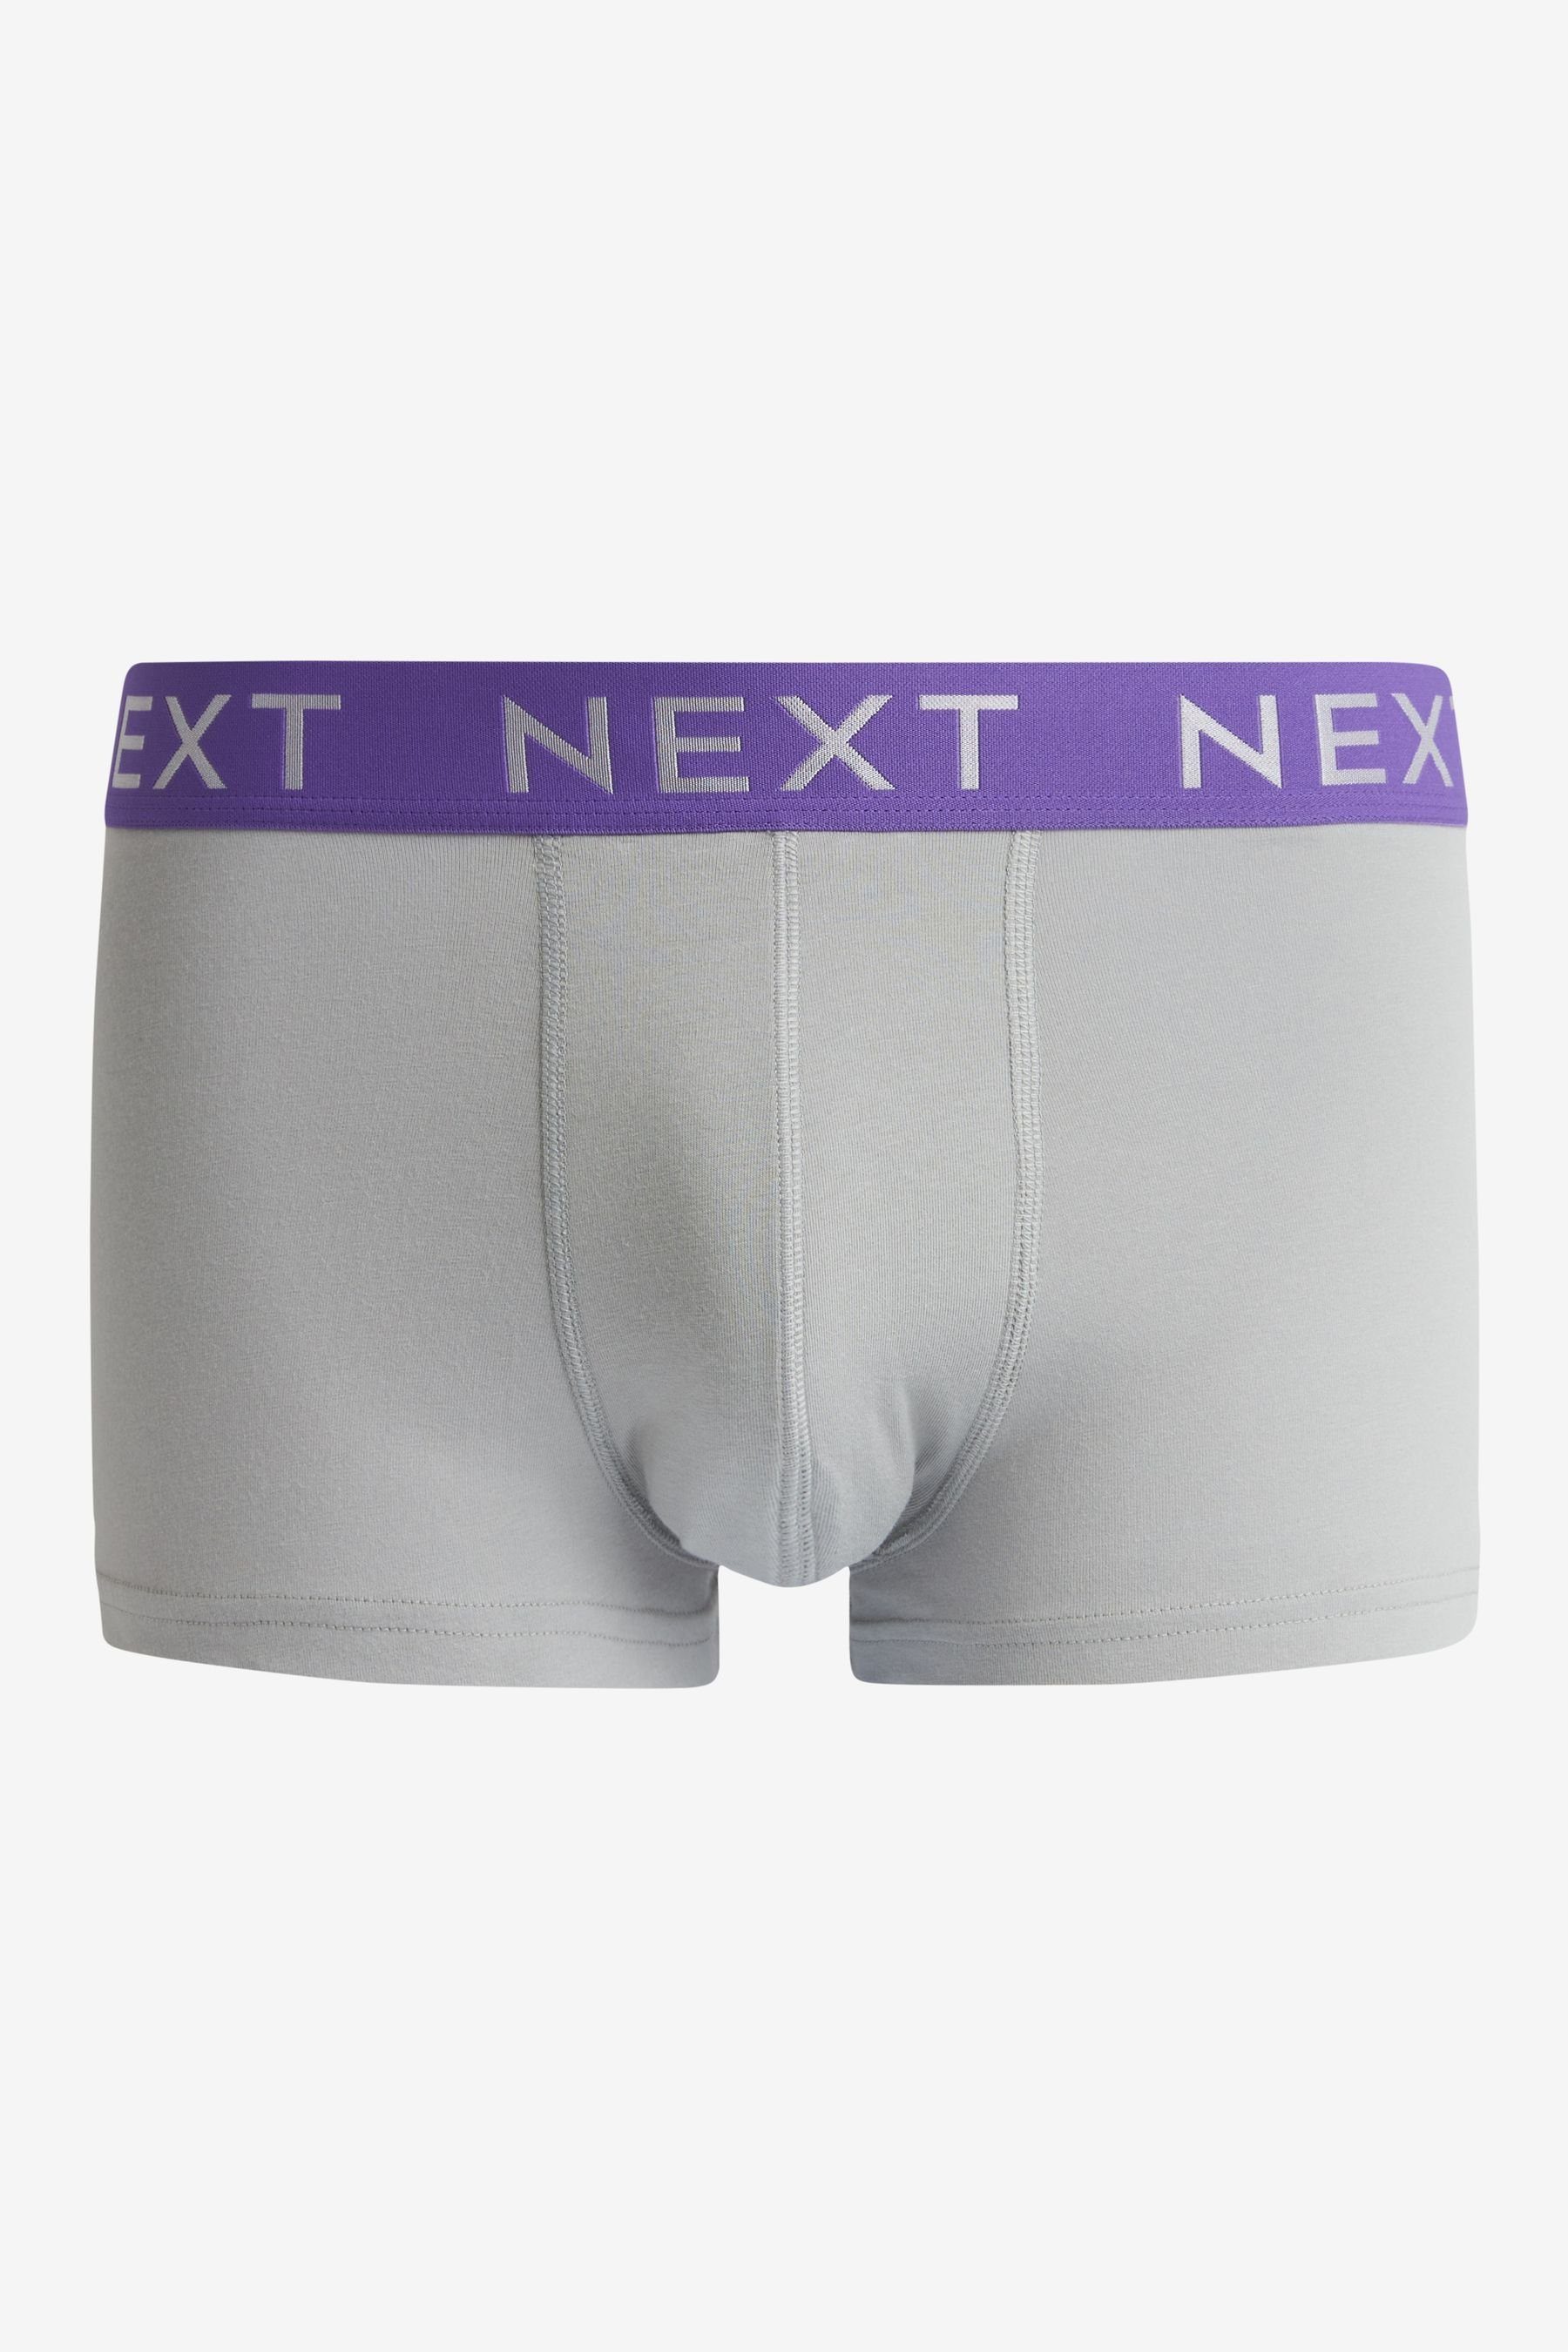 Next Base im Mixed (8-St) Neon Hipster 8er-Pack Waistband Hipster-Boxershorts